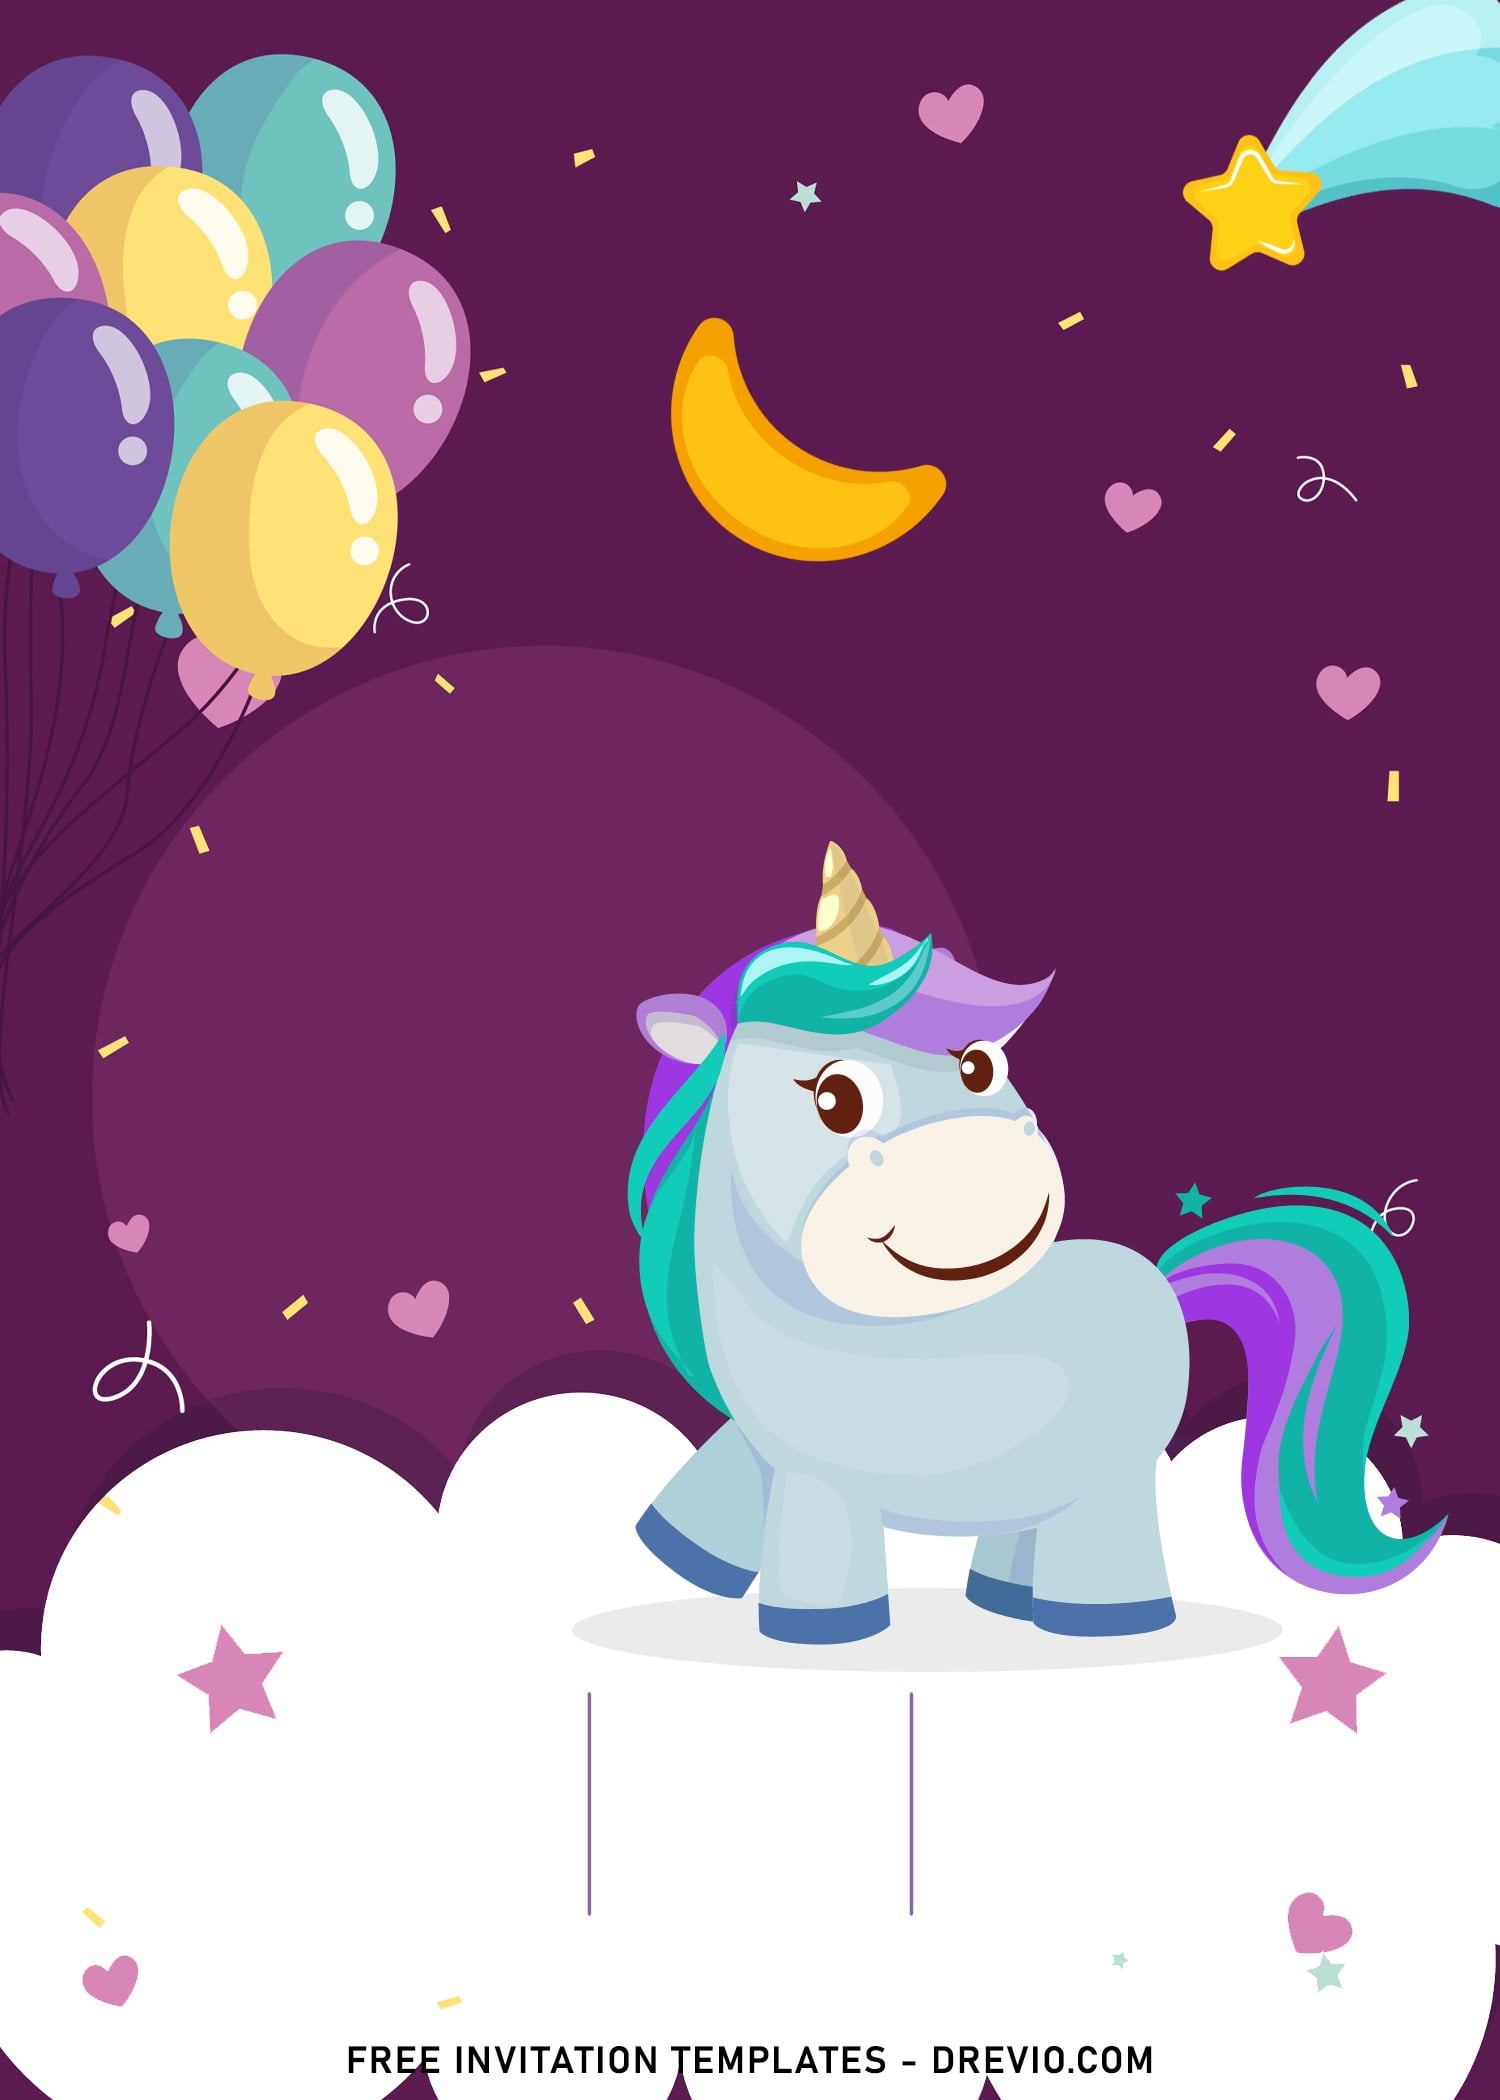 Cute Unicorn Background Design for Invitation for Whimsical Party Invites